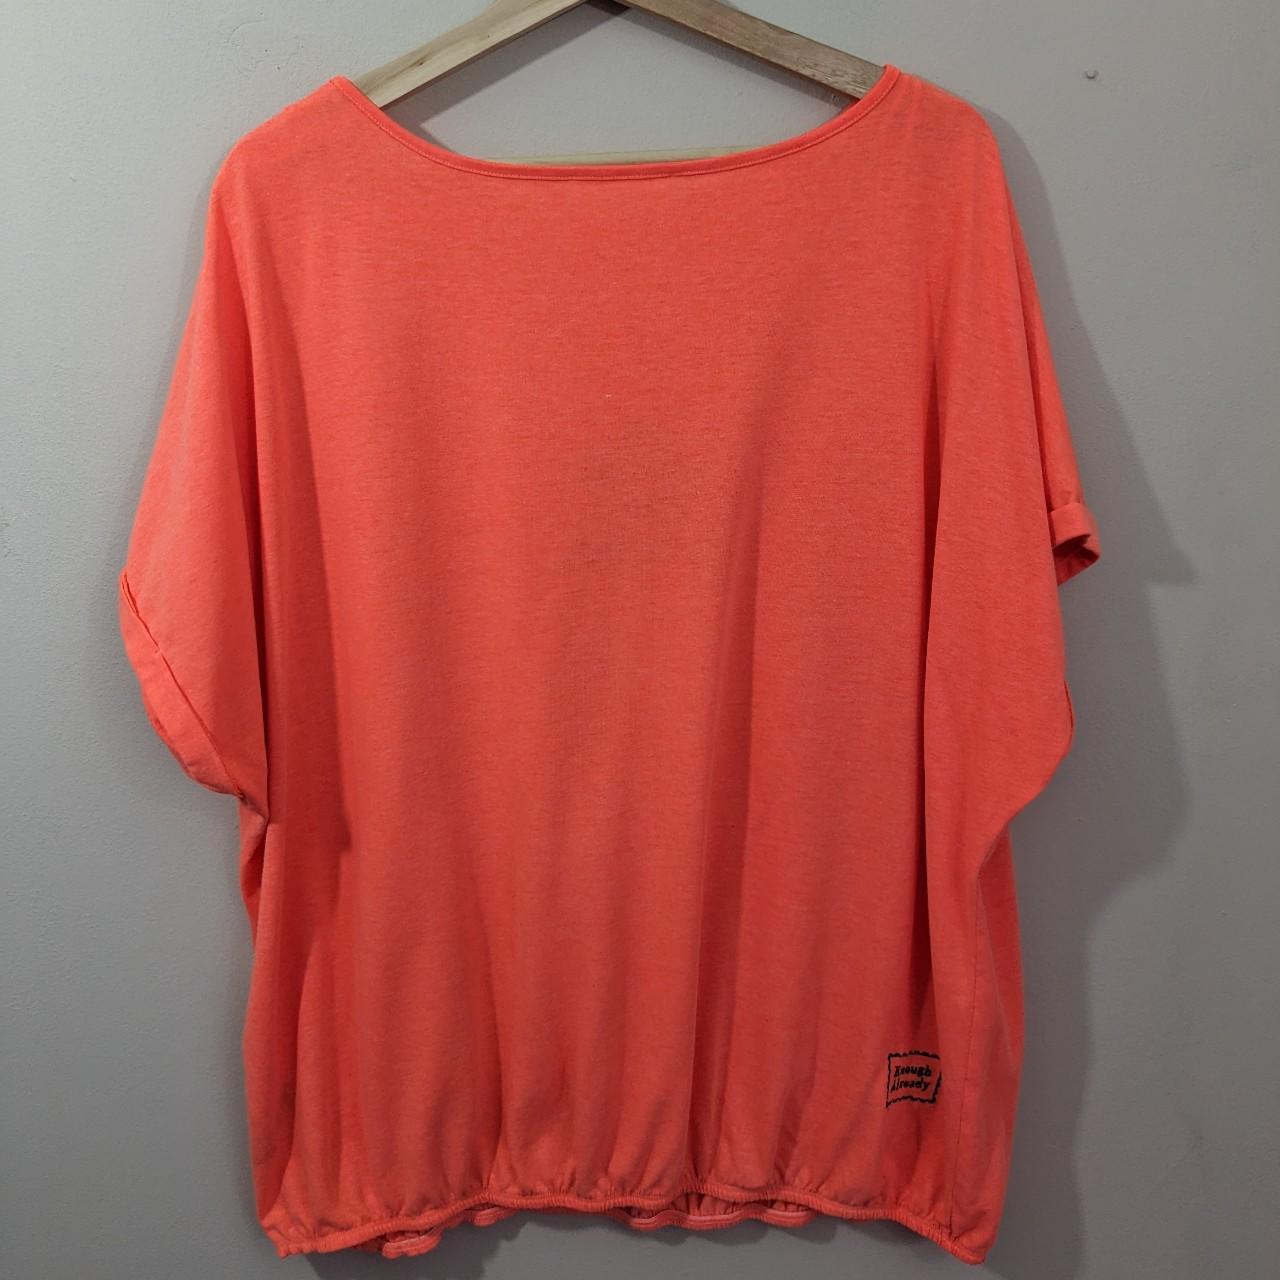 Size 22 Highlighter Orange Up-cycled Tee - Embroidered Virginia Woolf Line